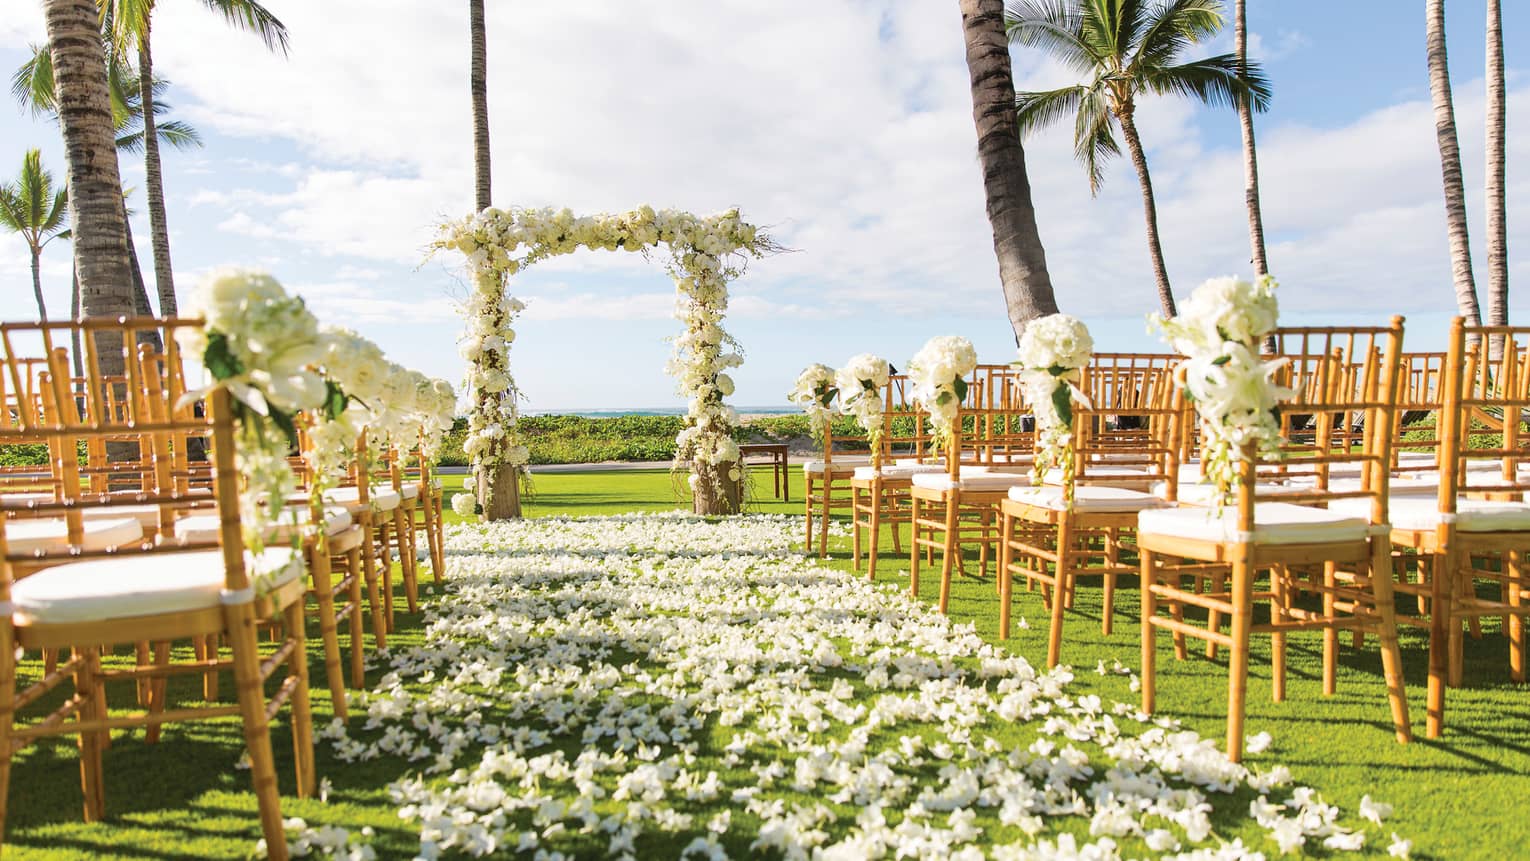 Outdoor wedding ceremony set up, white flowers along aisle between rows of chairs, altar